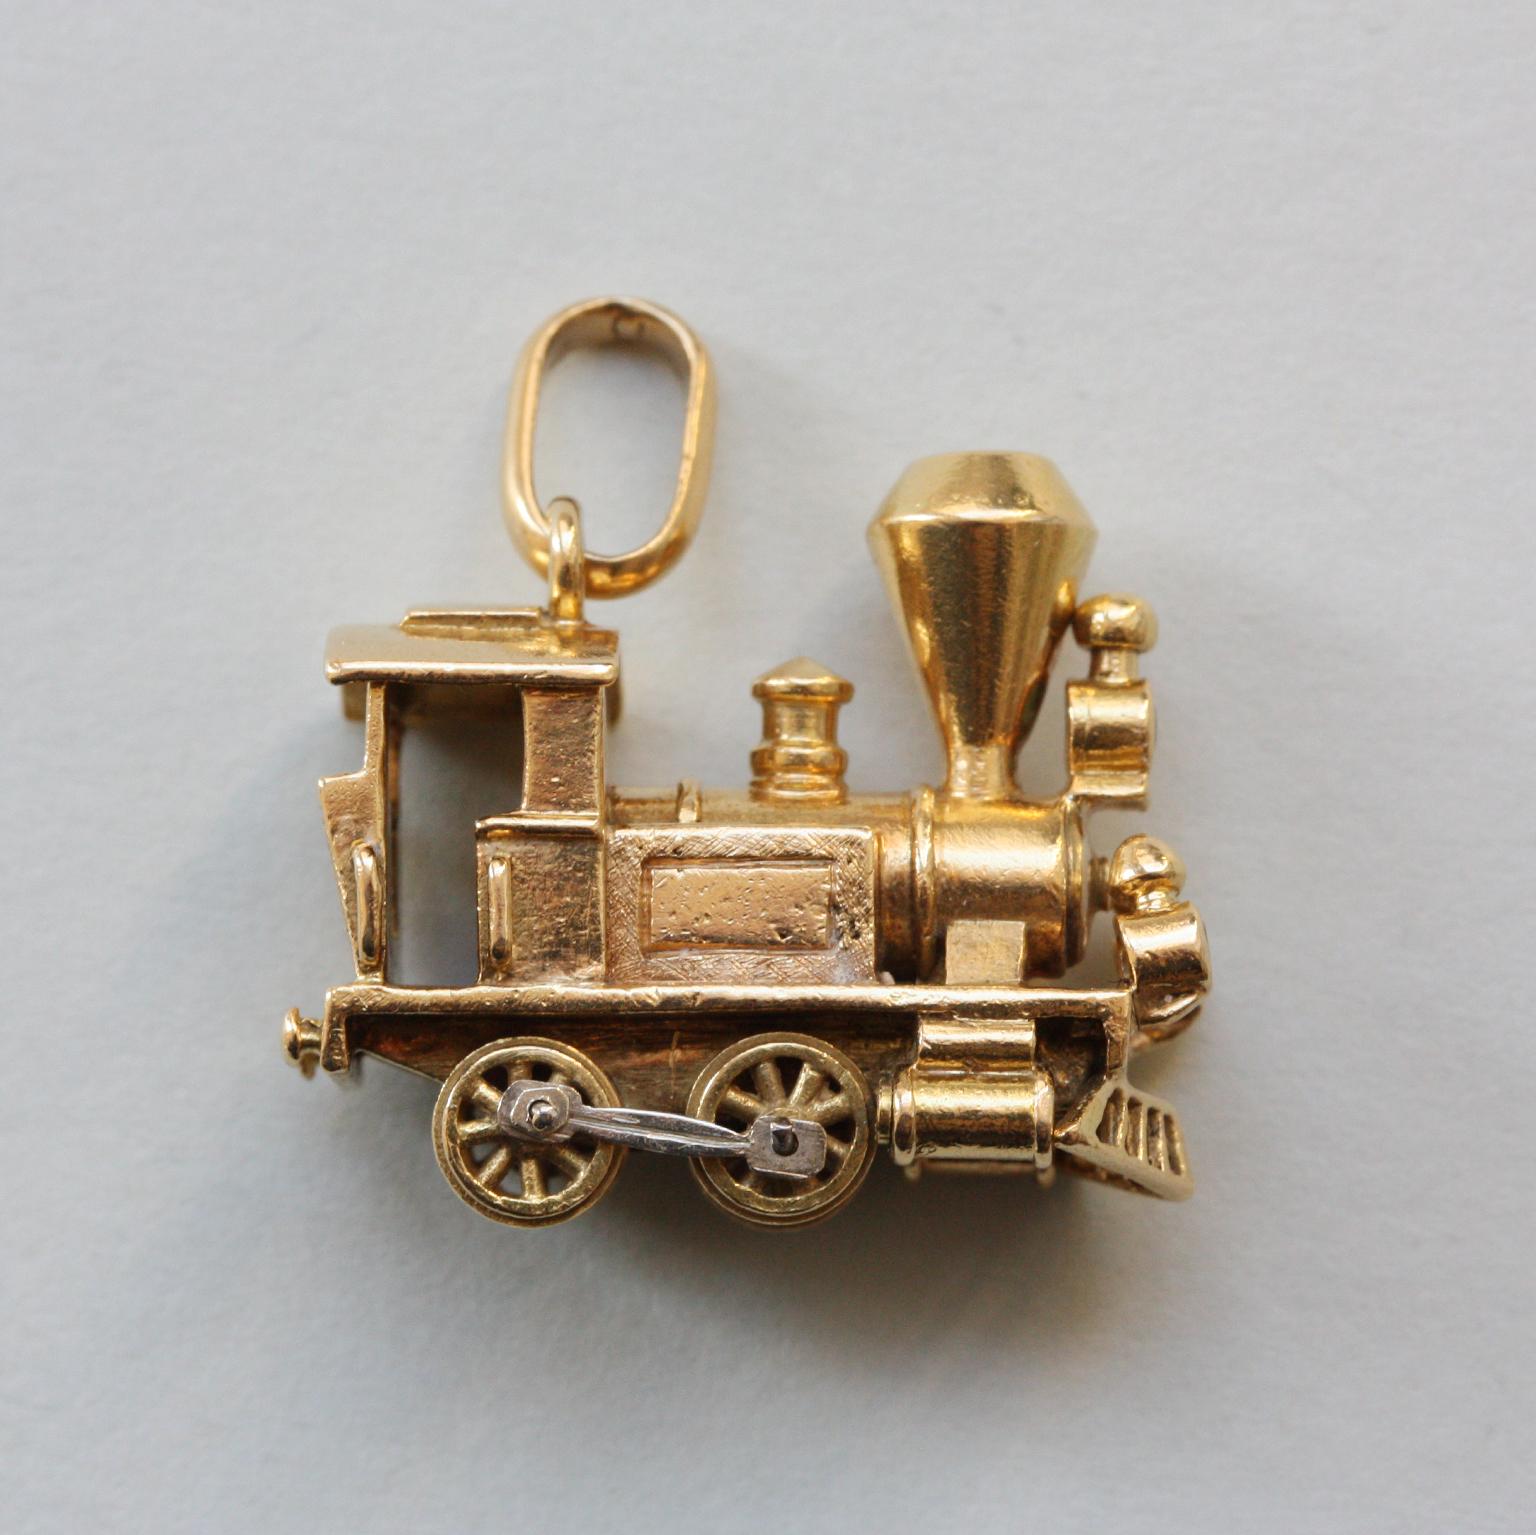 A bi-color 18 carat gold locomotive charm, with two diamond headlights and one emerald headlight, signed and numbered: Van Cleef & Arpels, 97265, with an 18 carat gold Van Cleef & Arpels chain.

weight locomotief: 12.71 grams
dimensions locomotive: